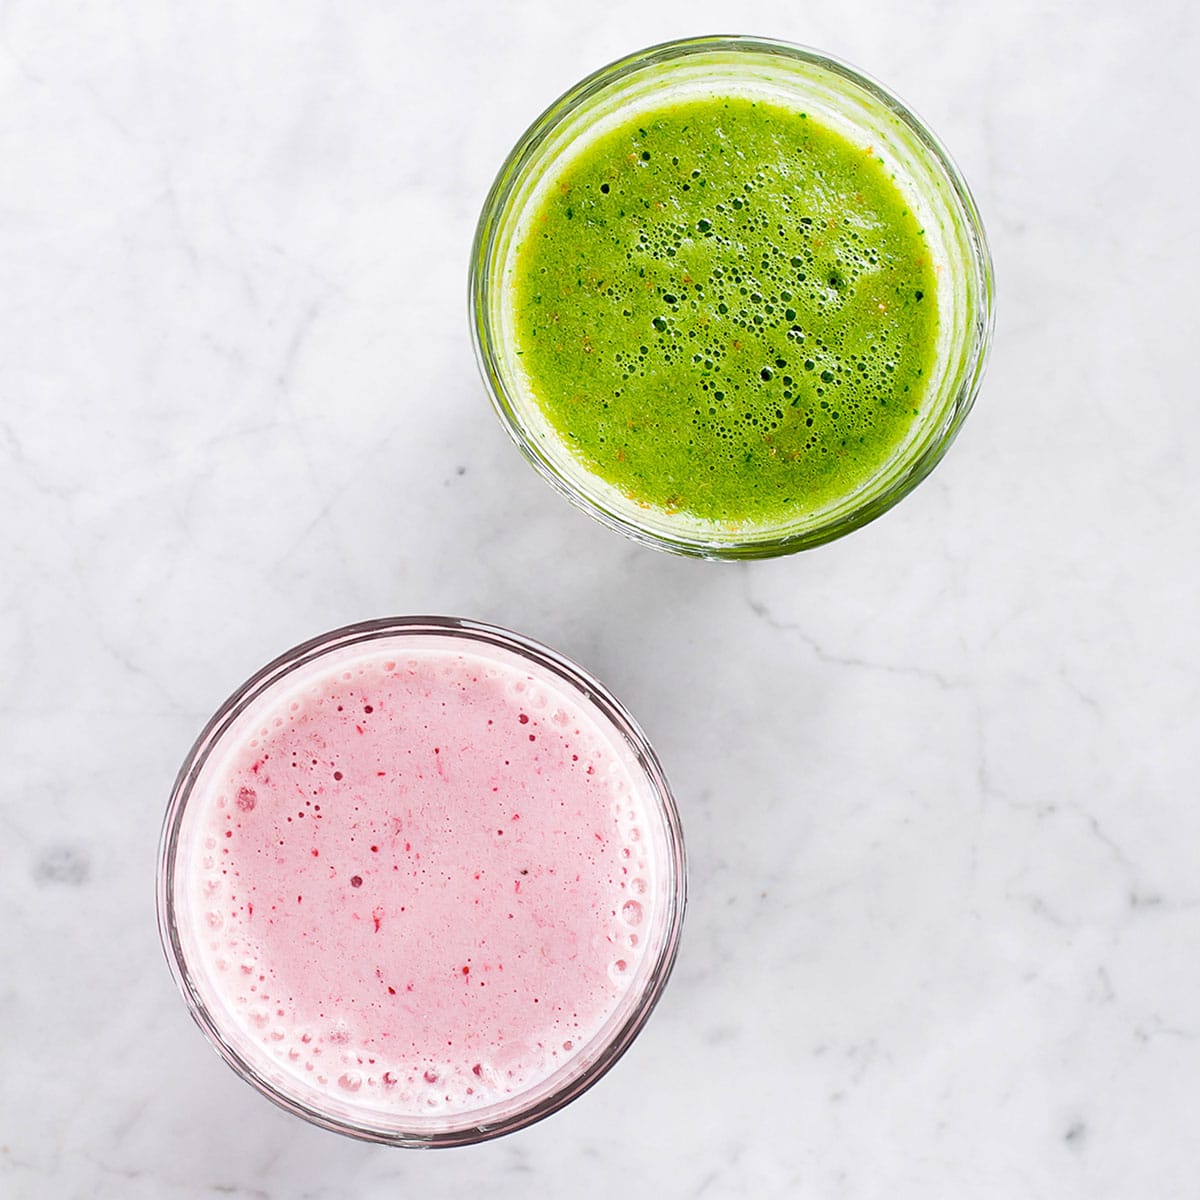 How long does smoothie last in the fridge? Drink it within 48 hours. After that, the smoothie will start to lose its flavor and nutrients.